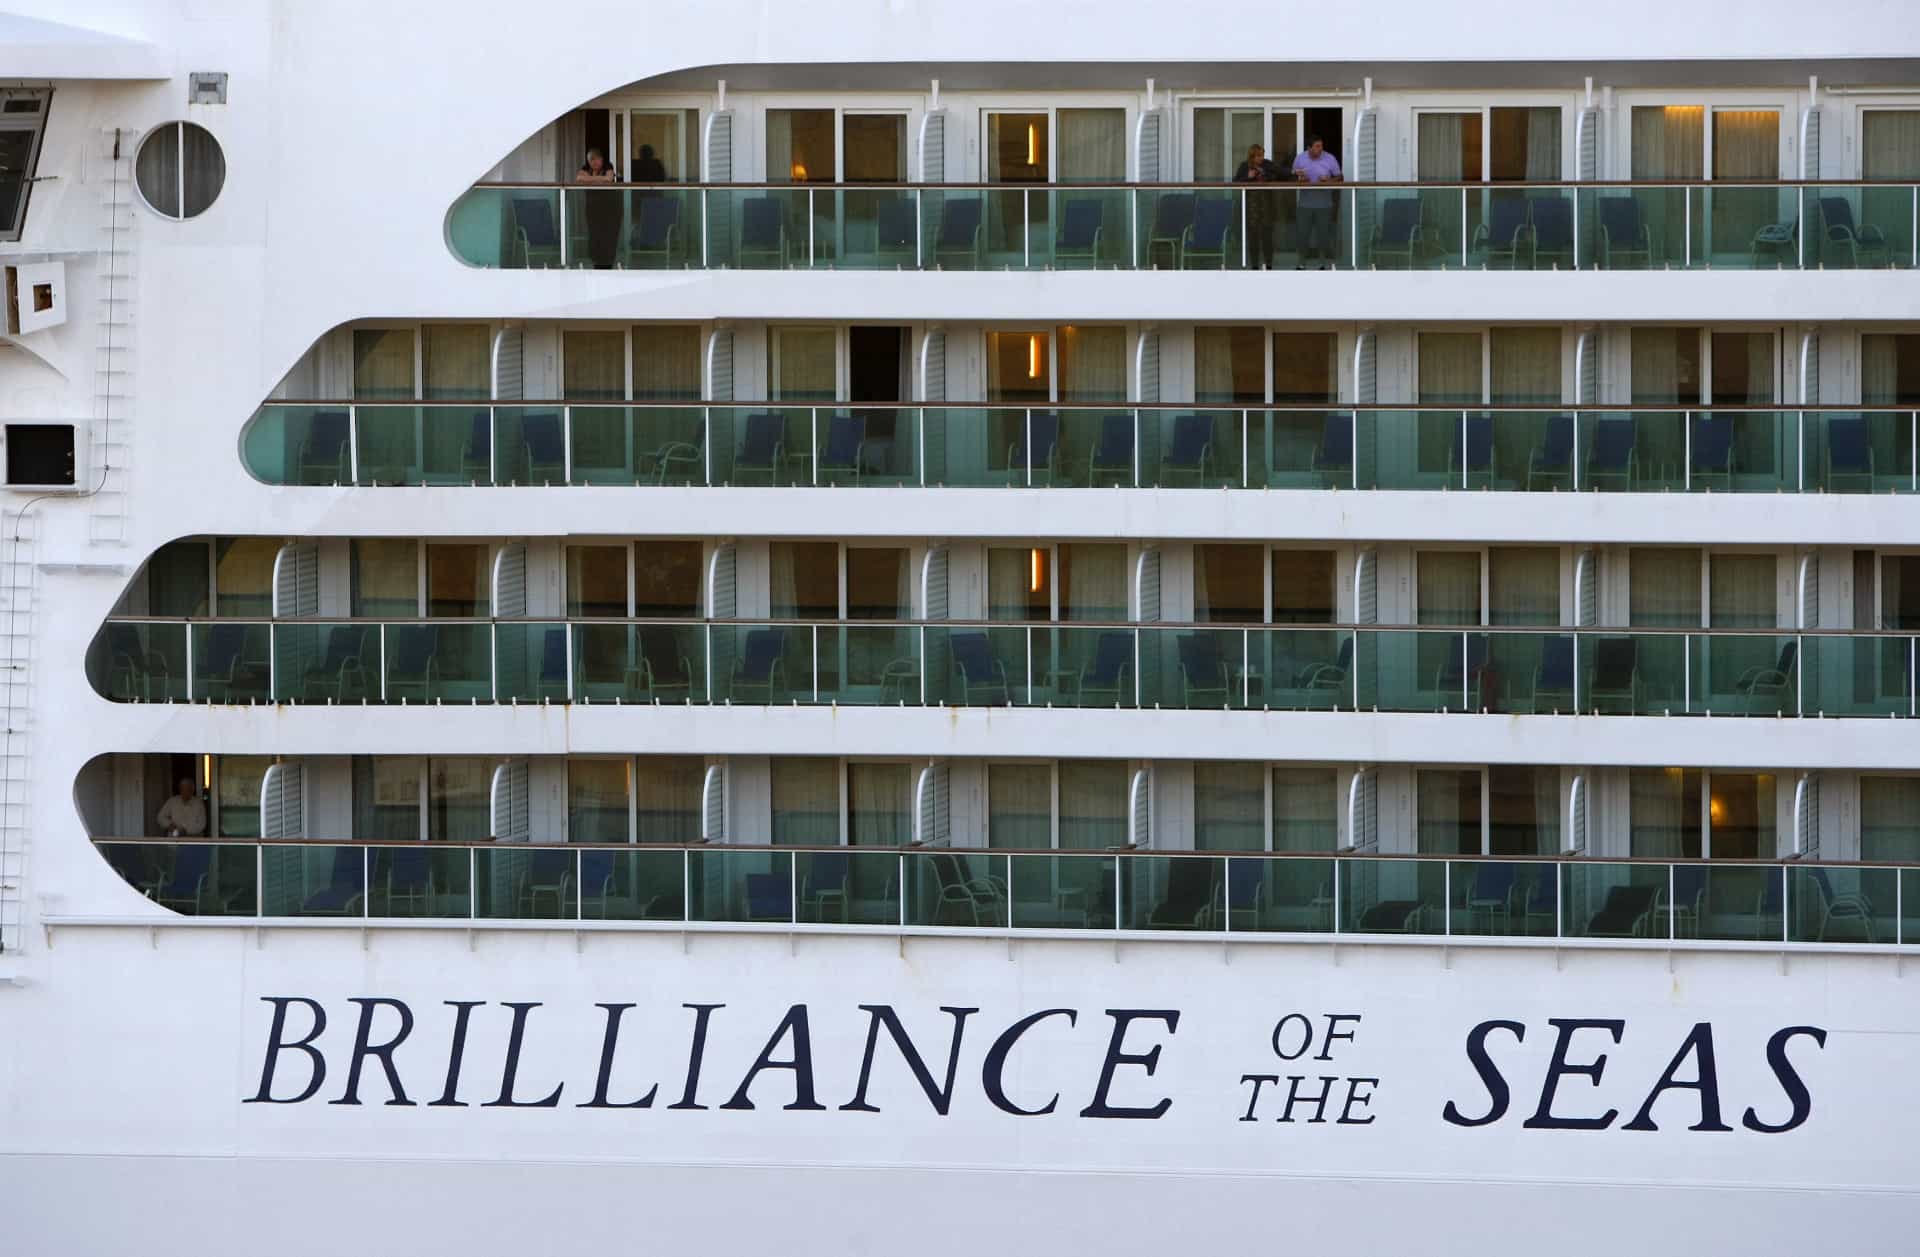 <p>In July of 2005, George Allen Smith IV was aboard the MS Brilliance of the Seas for his honeymoon. It was a <a href="https://uk.starsinsider.com/travel/220909/the-unsettling-environmental-cost-of-cruises">cruise</a> along the Mediterranean and should've meant perfection. Instead, he disappeared the night of July 5 and blood was found in his cabin.</p>